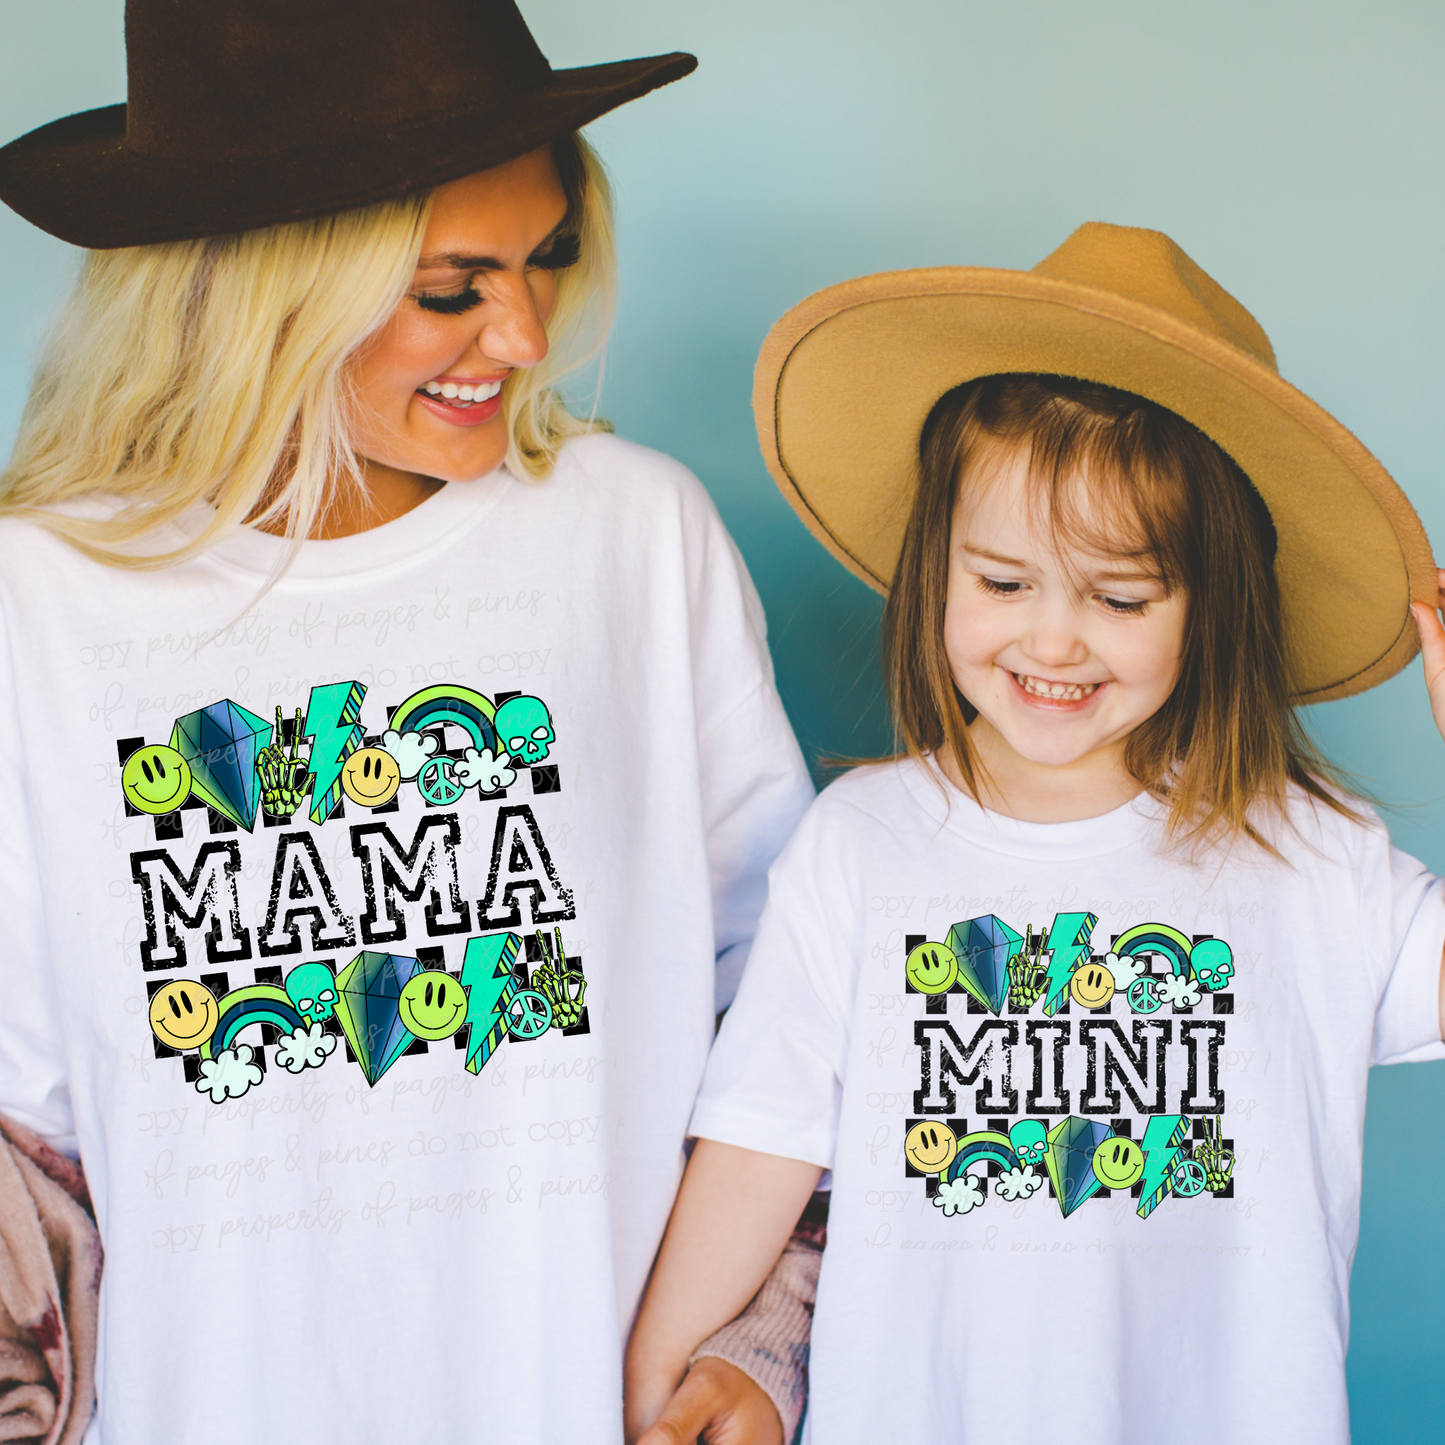 Mama and Me (blue/green retro) -- Youth version